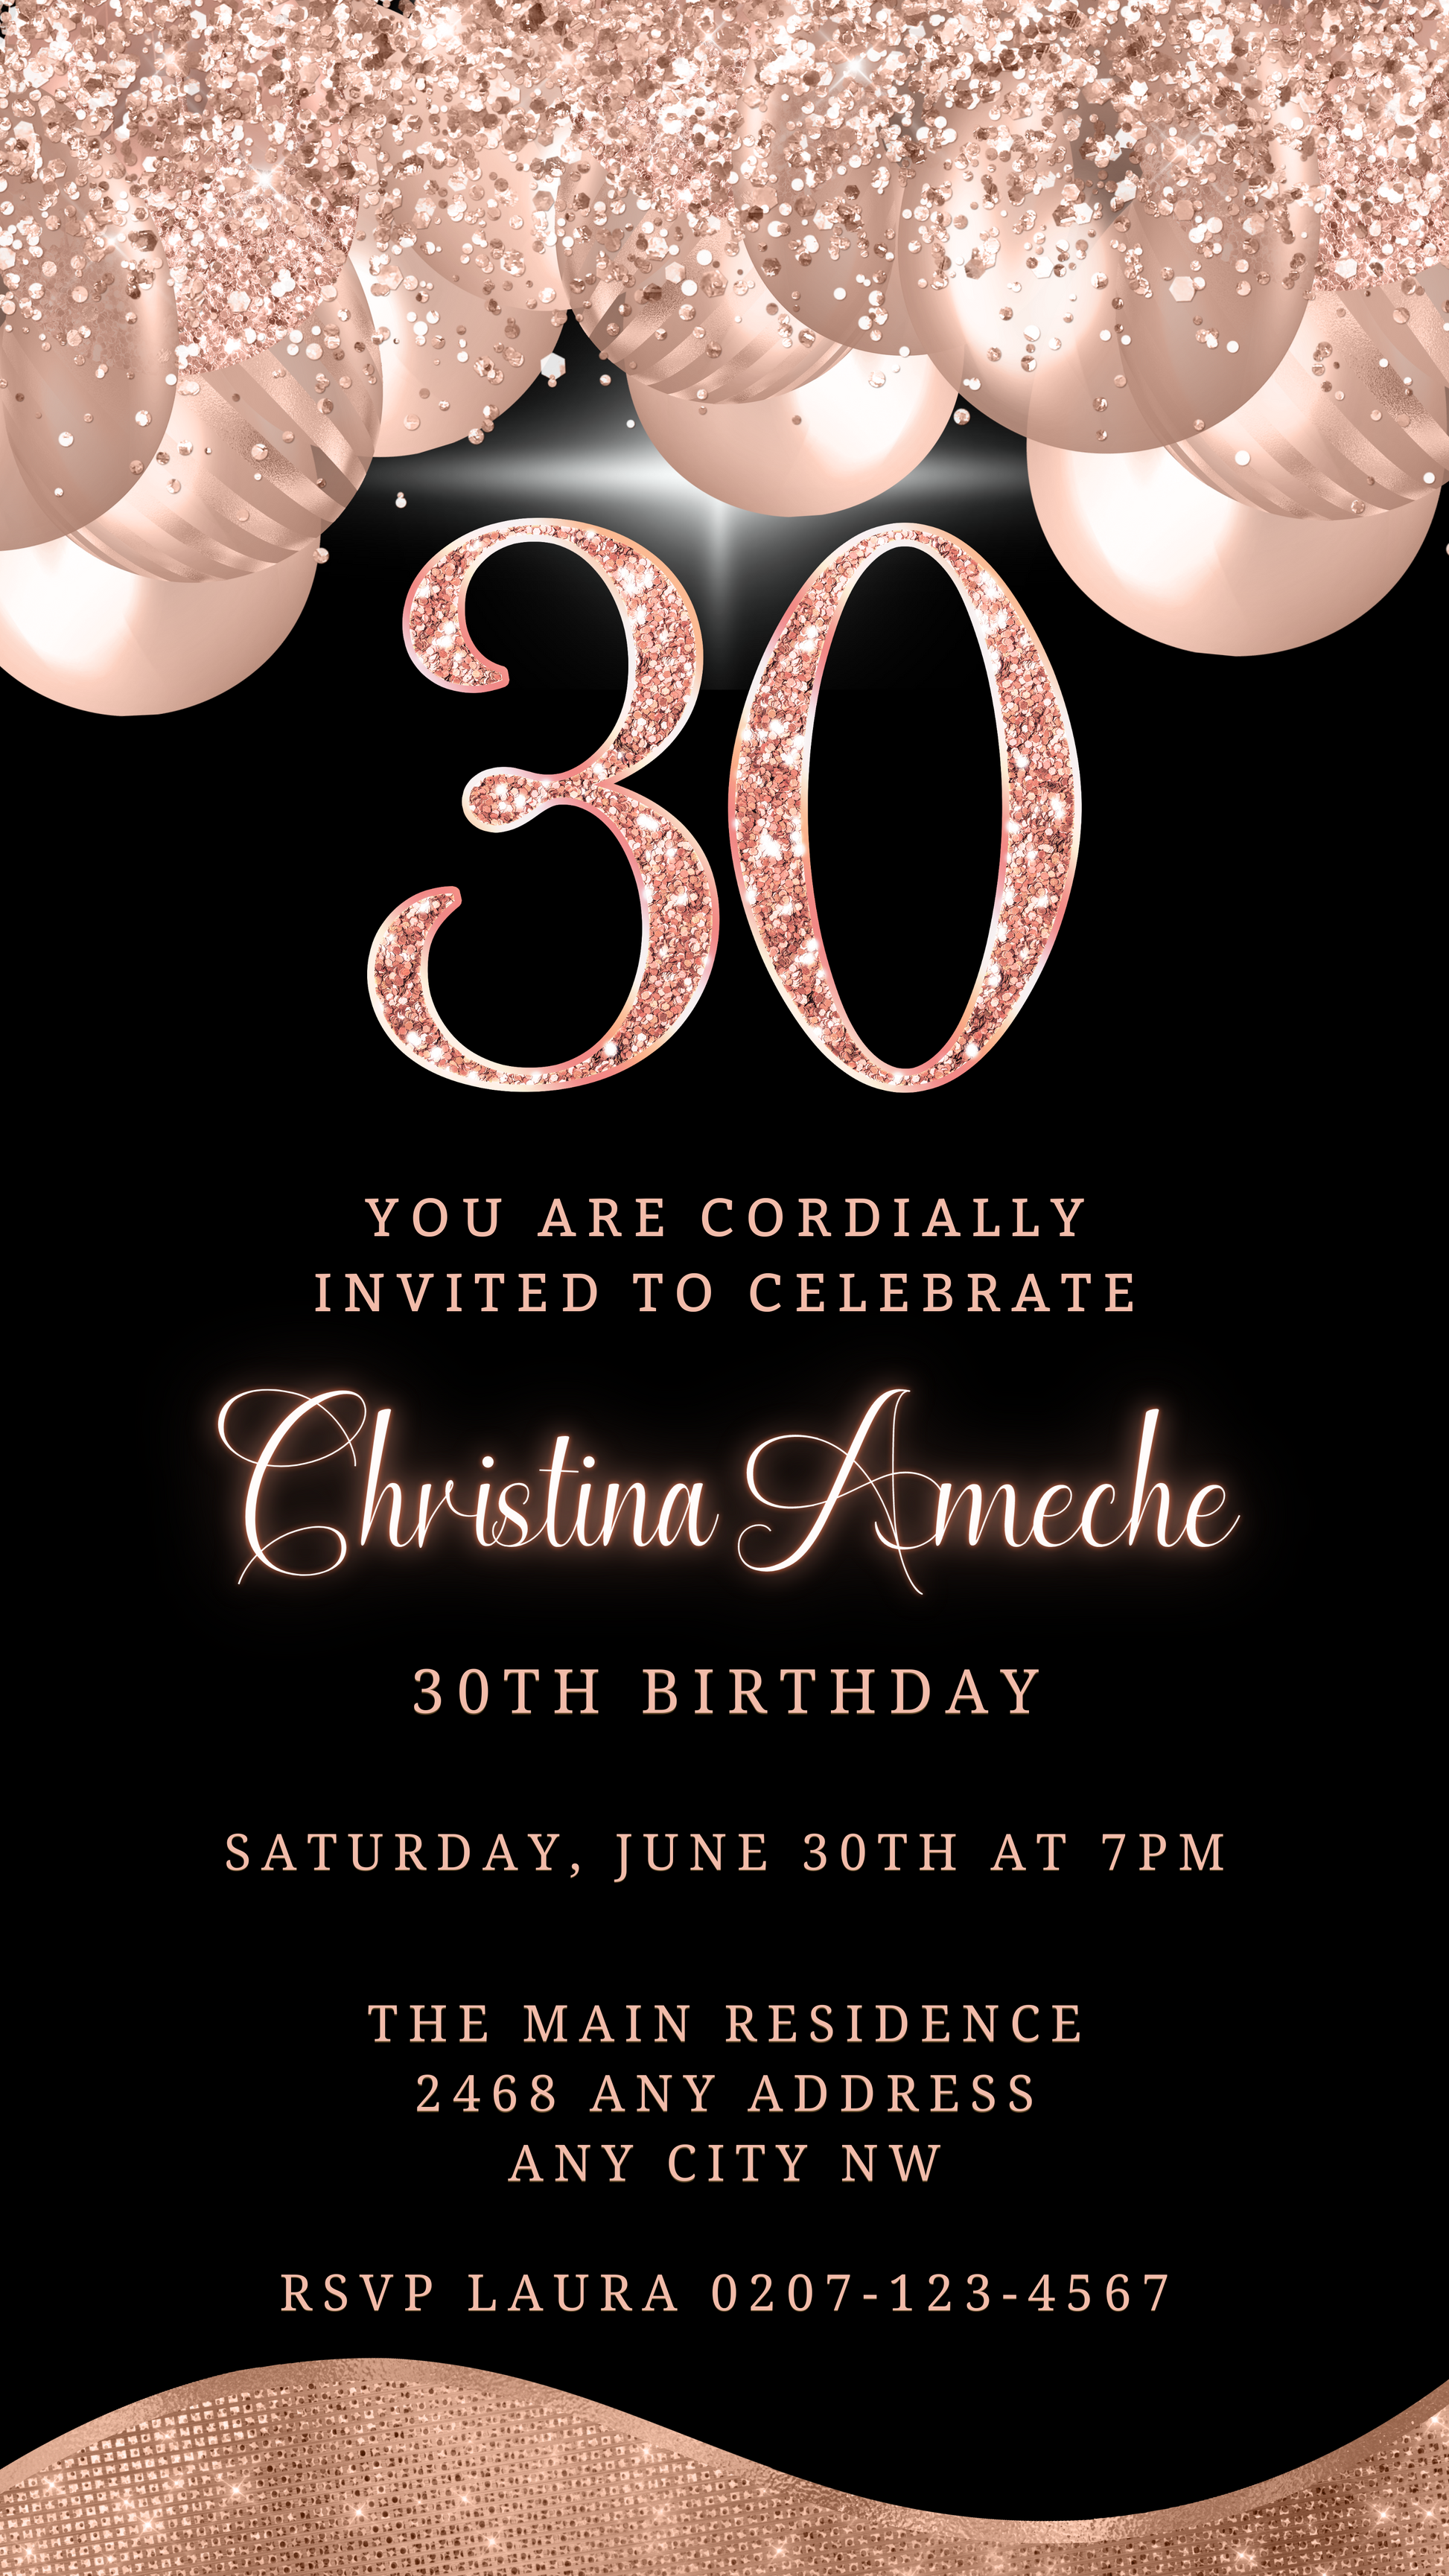 Customisable Rose Gold Balloons Glitter 30th Birthday Evite with pink and gold text on black background, featuring glittery numbers and balloons. Download and personalise via Canva.